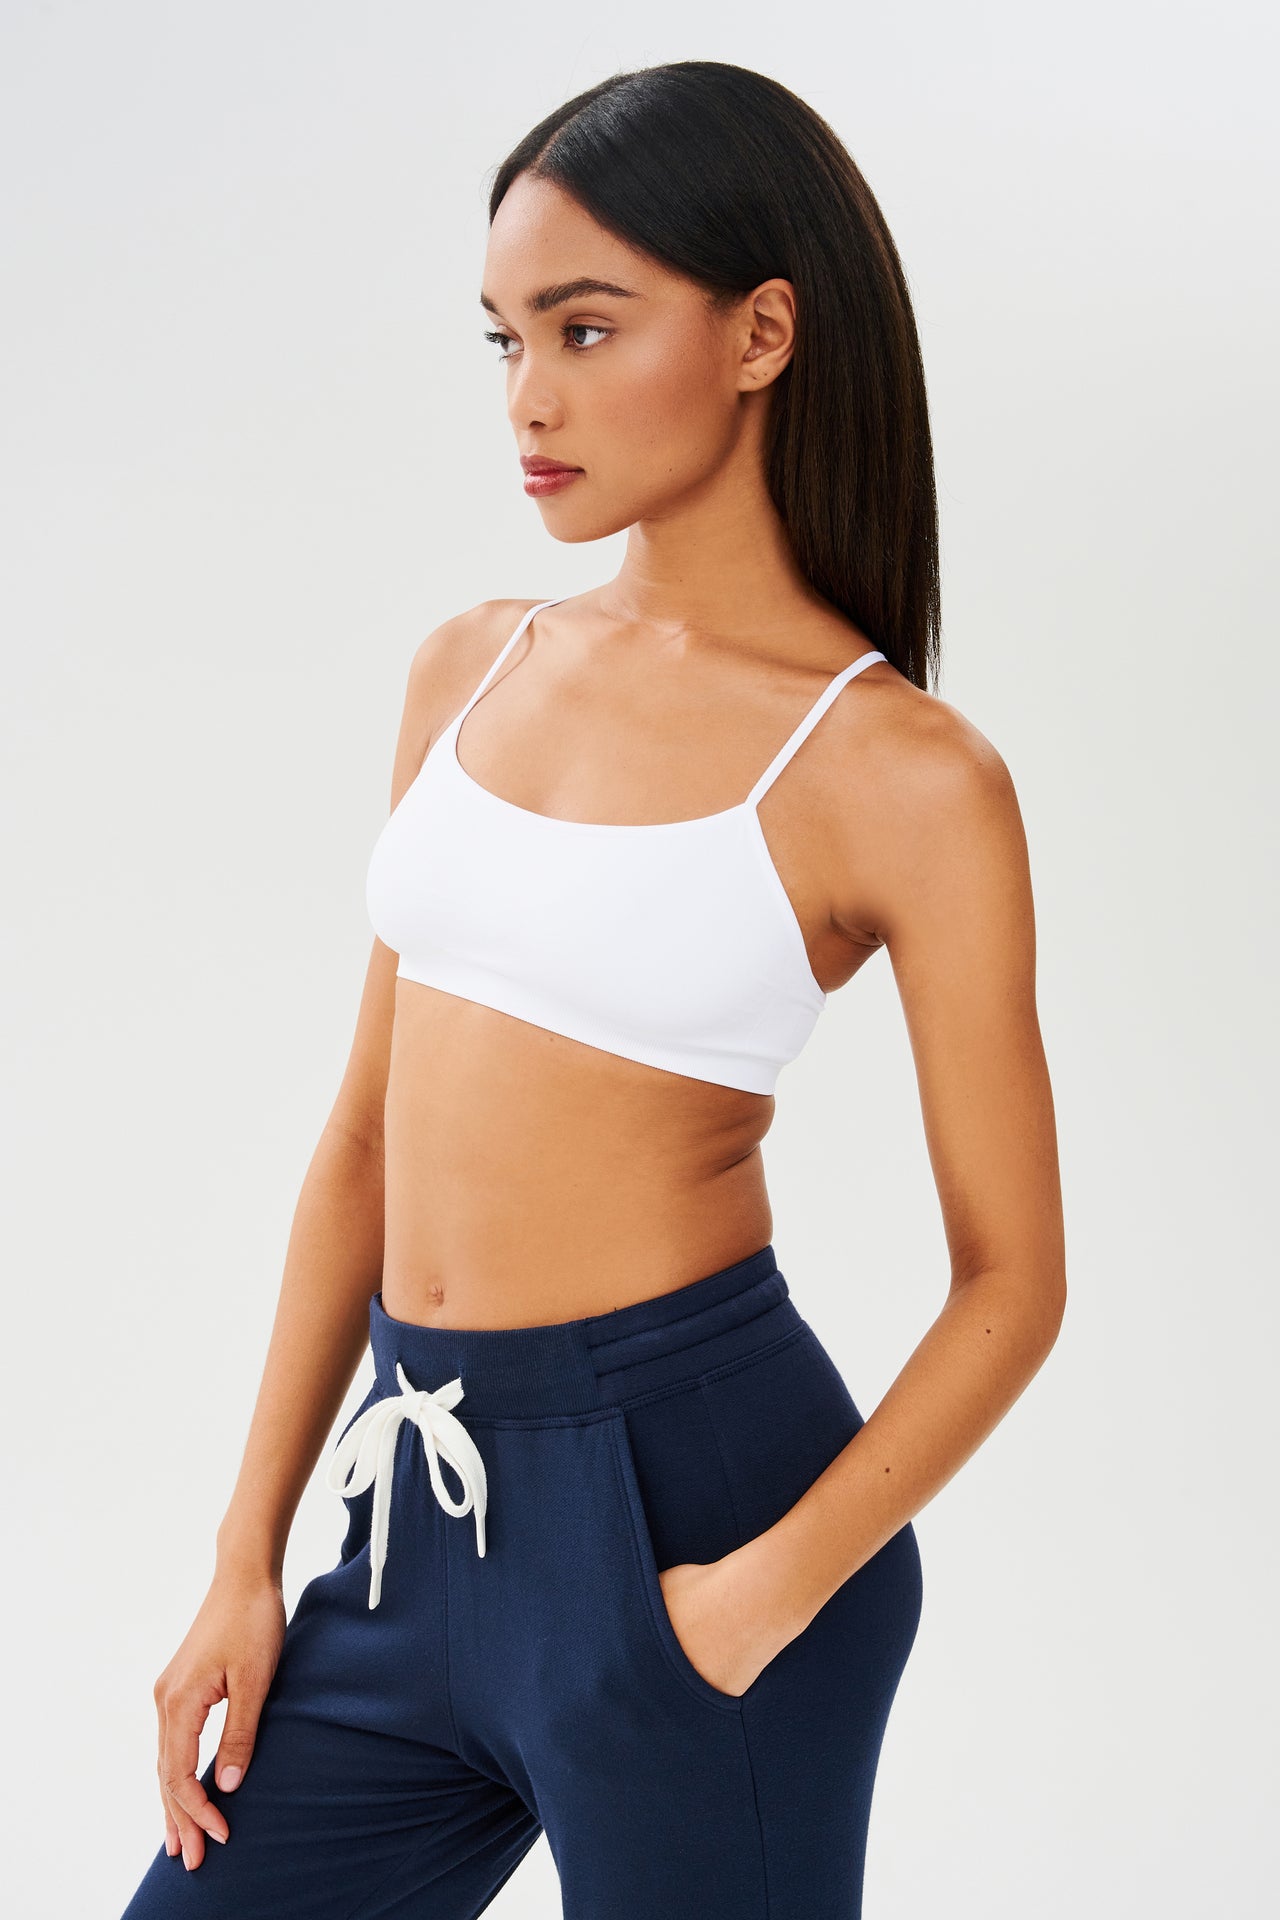 The model is wearing a Splits59 Loren Seamless Bra in White and navy sweatpants, perfect for chafe-free gym workouts.